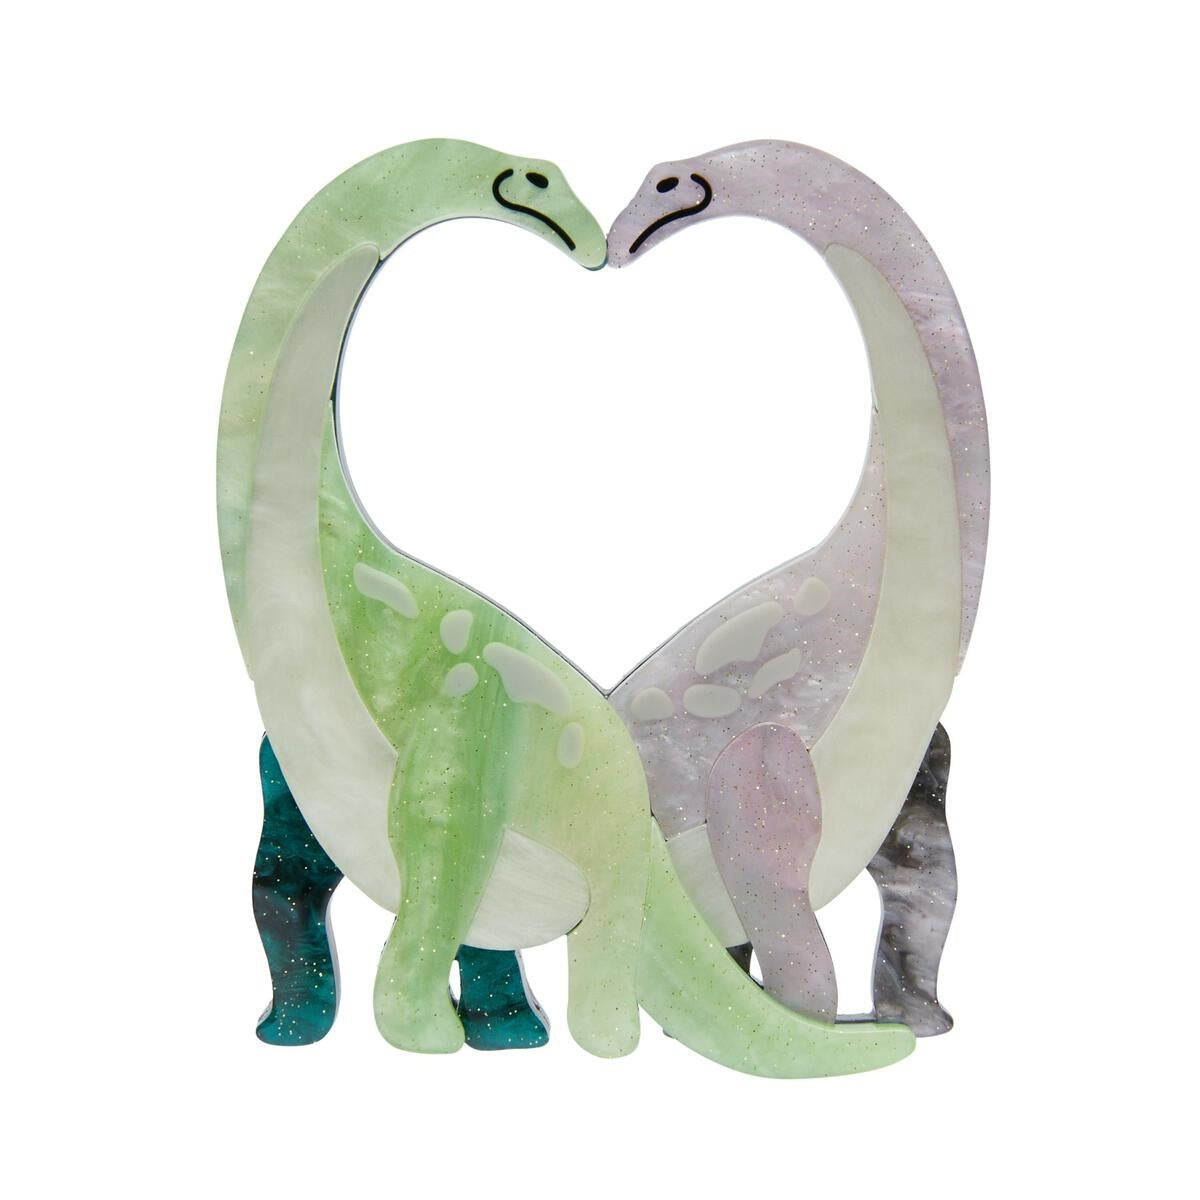 Dinosauria "Neck and Neck" pair brachiosauruses heart shaped negative space ripple lilac light green white layered resin brooch